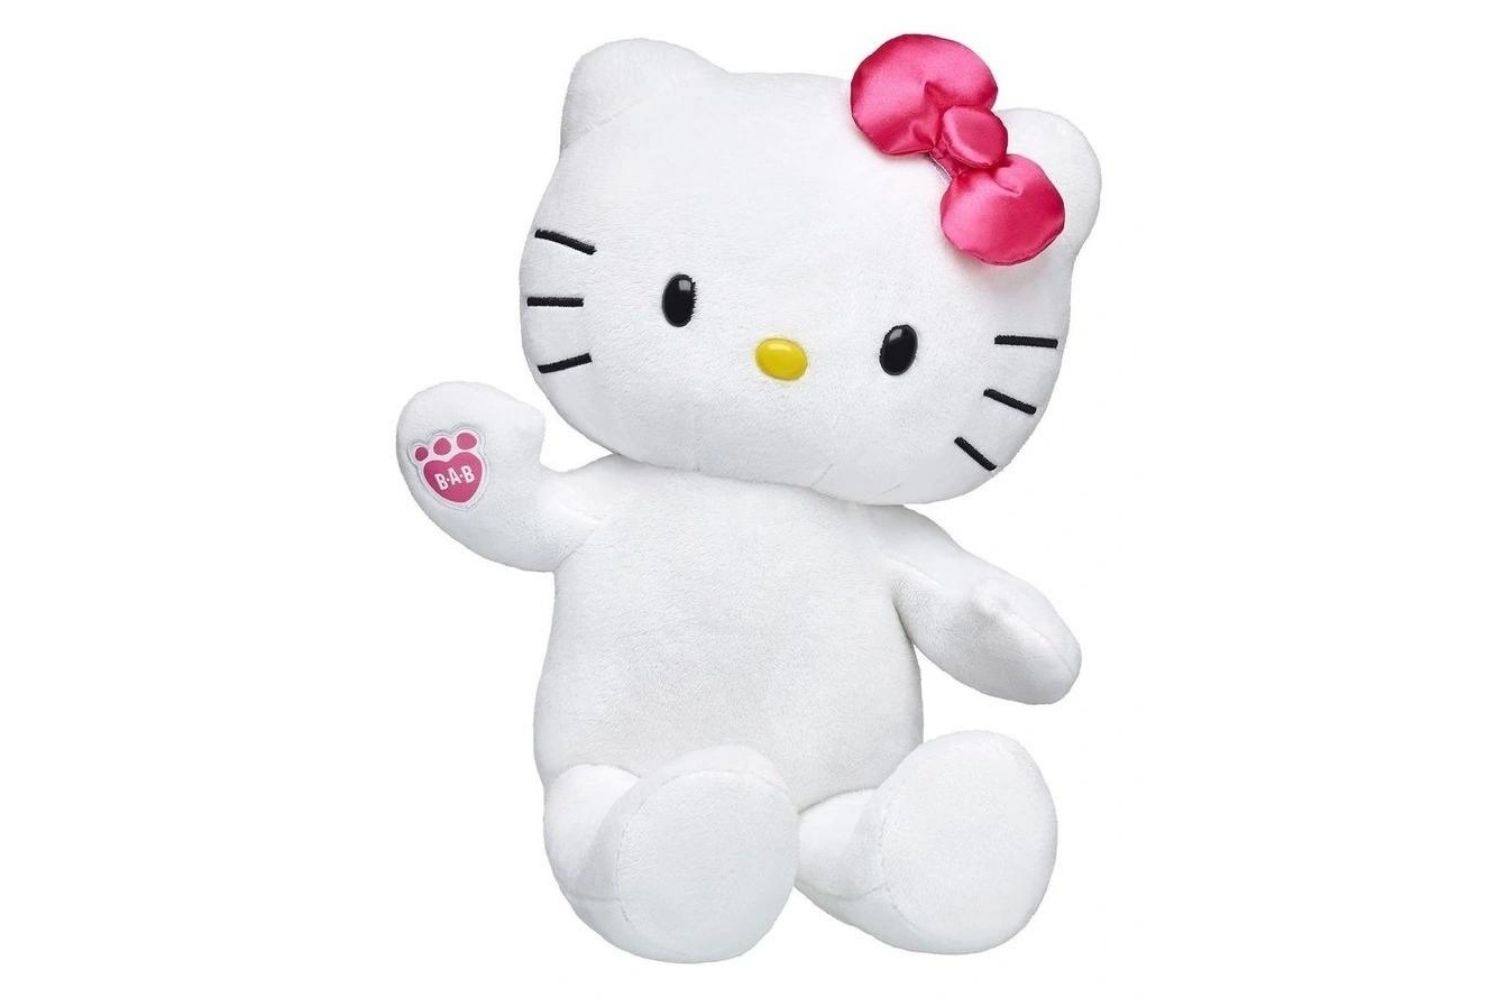 15-captivating-facts-about-build-a-bear-hello-kitty